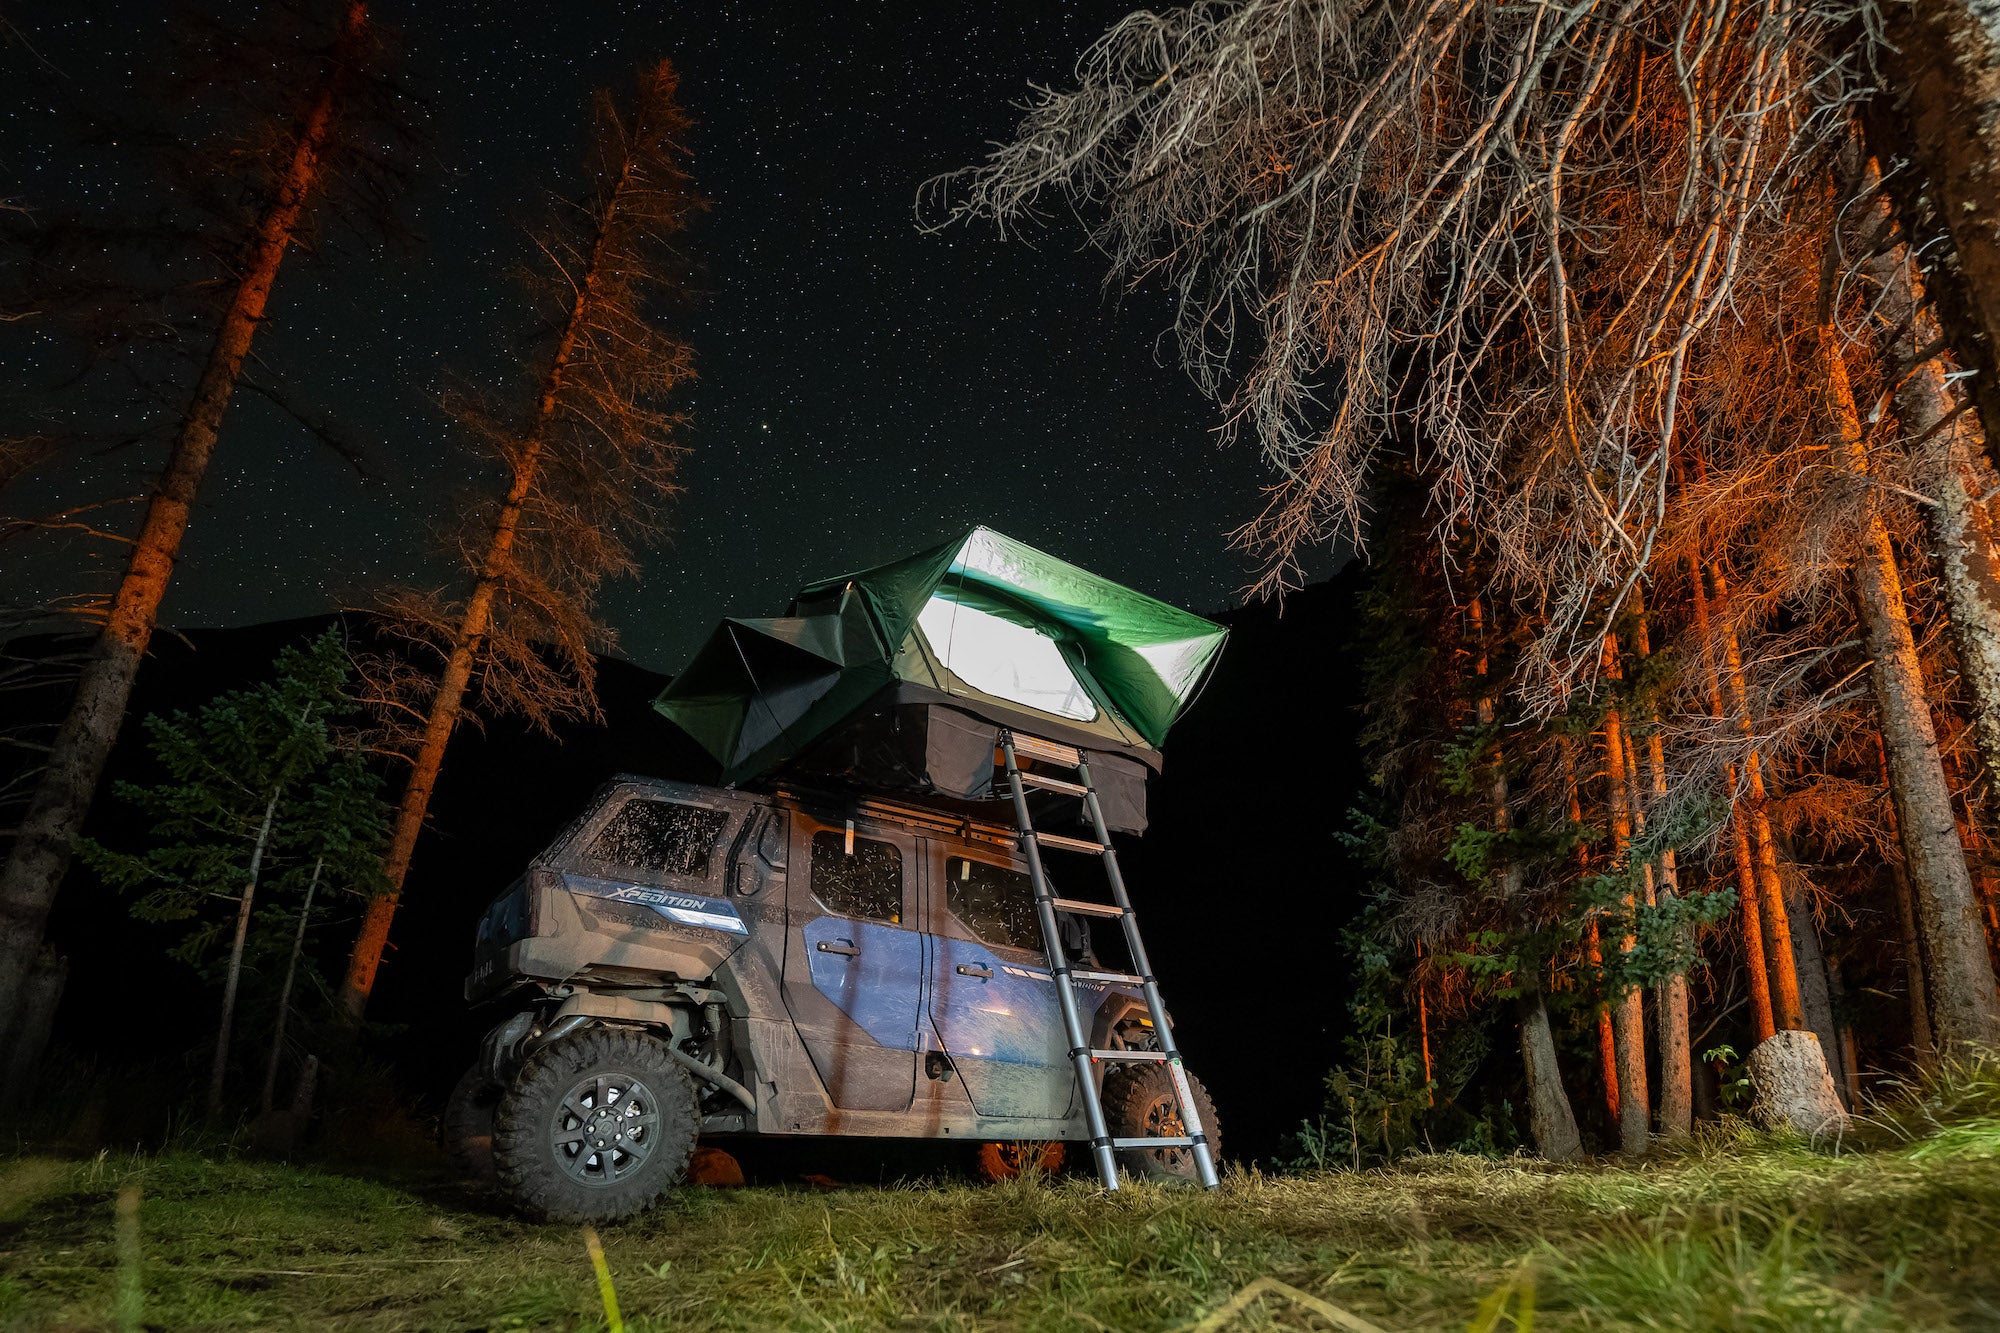 A flat roof means you can camp up high.